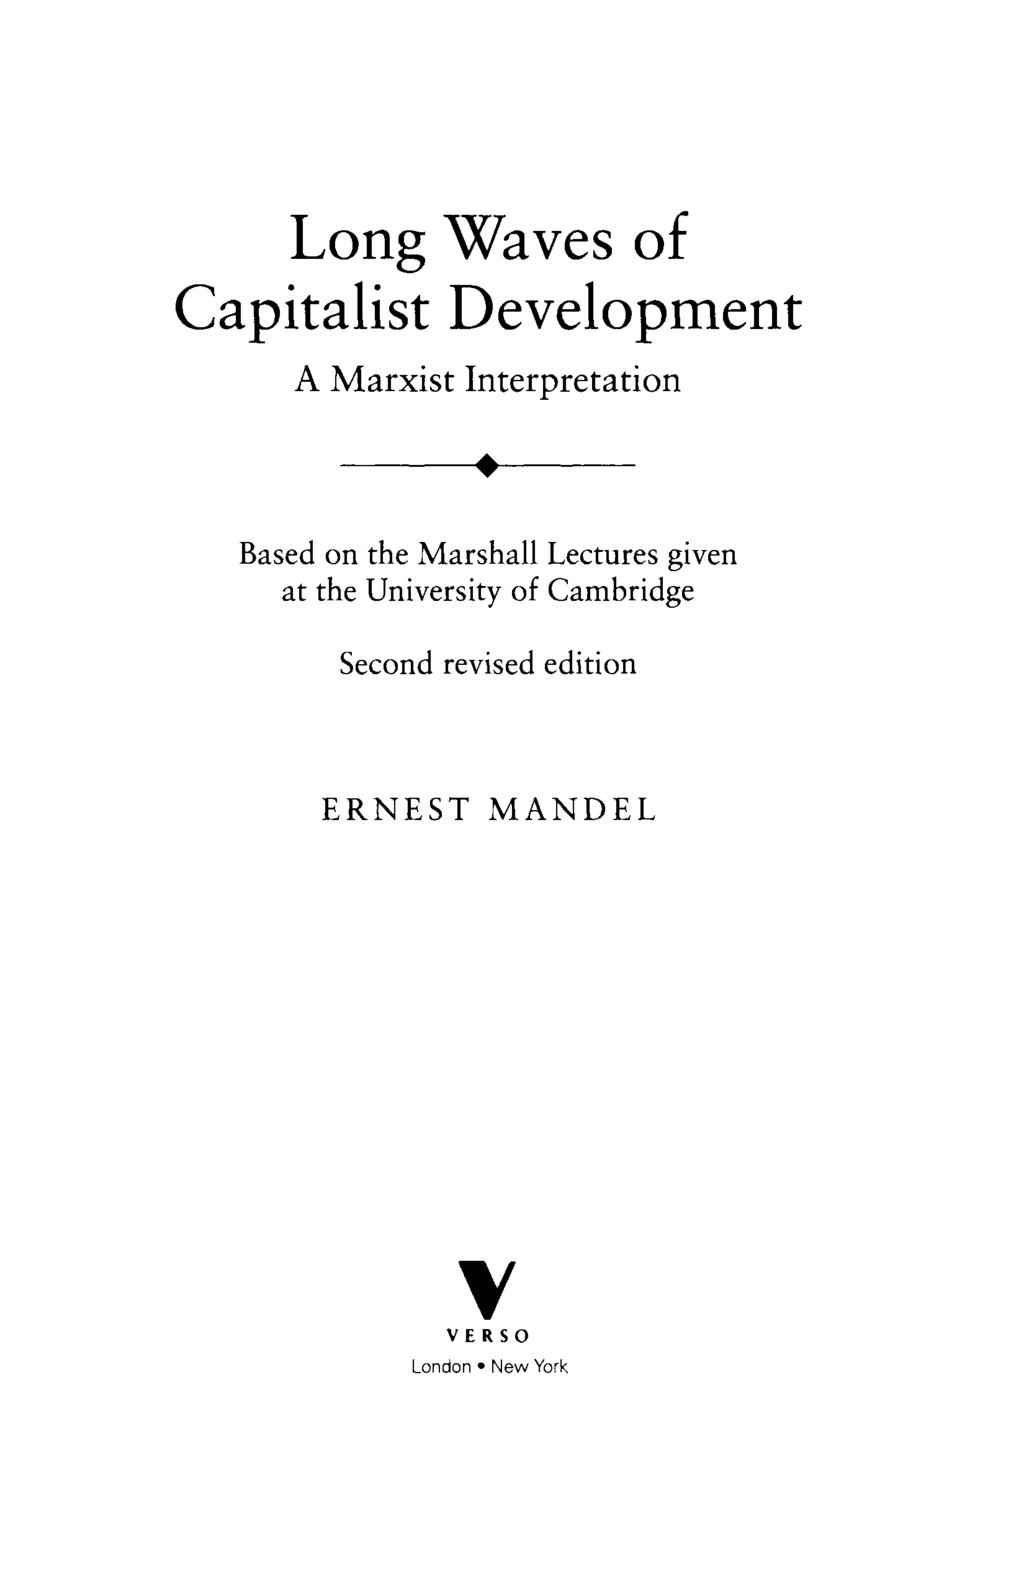 Long Waves of Capitalist Development A Marxist Interpretation Based on the Marshall Lectures